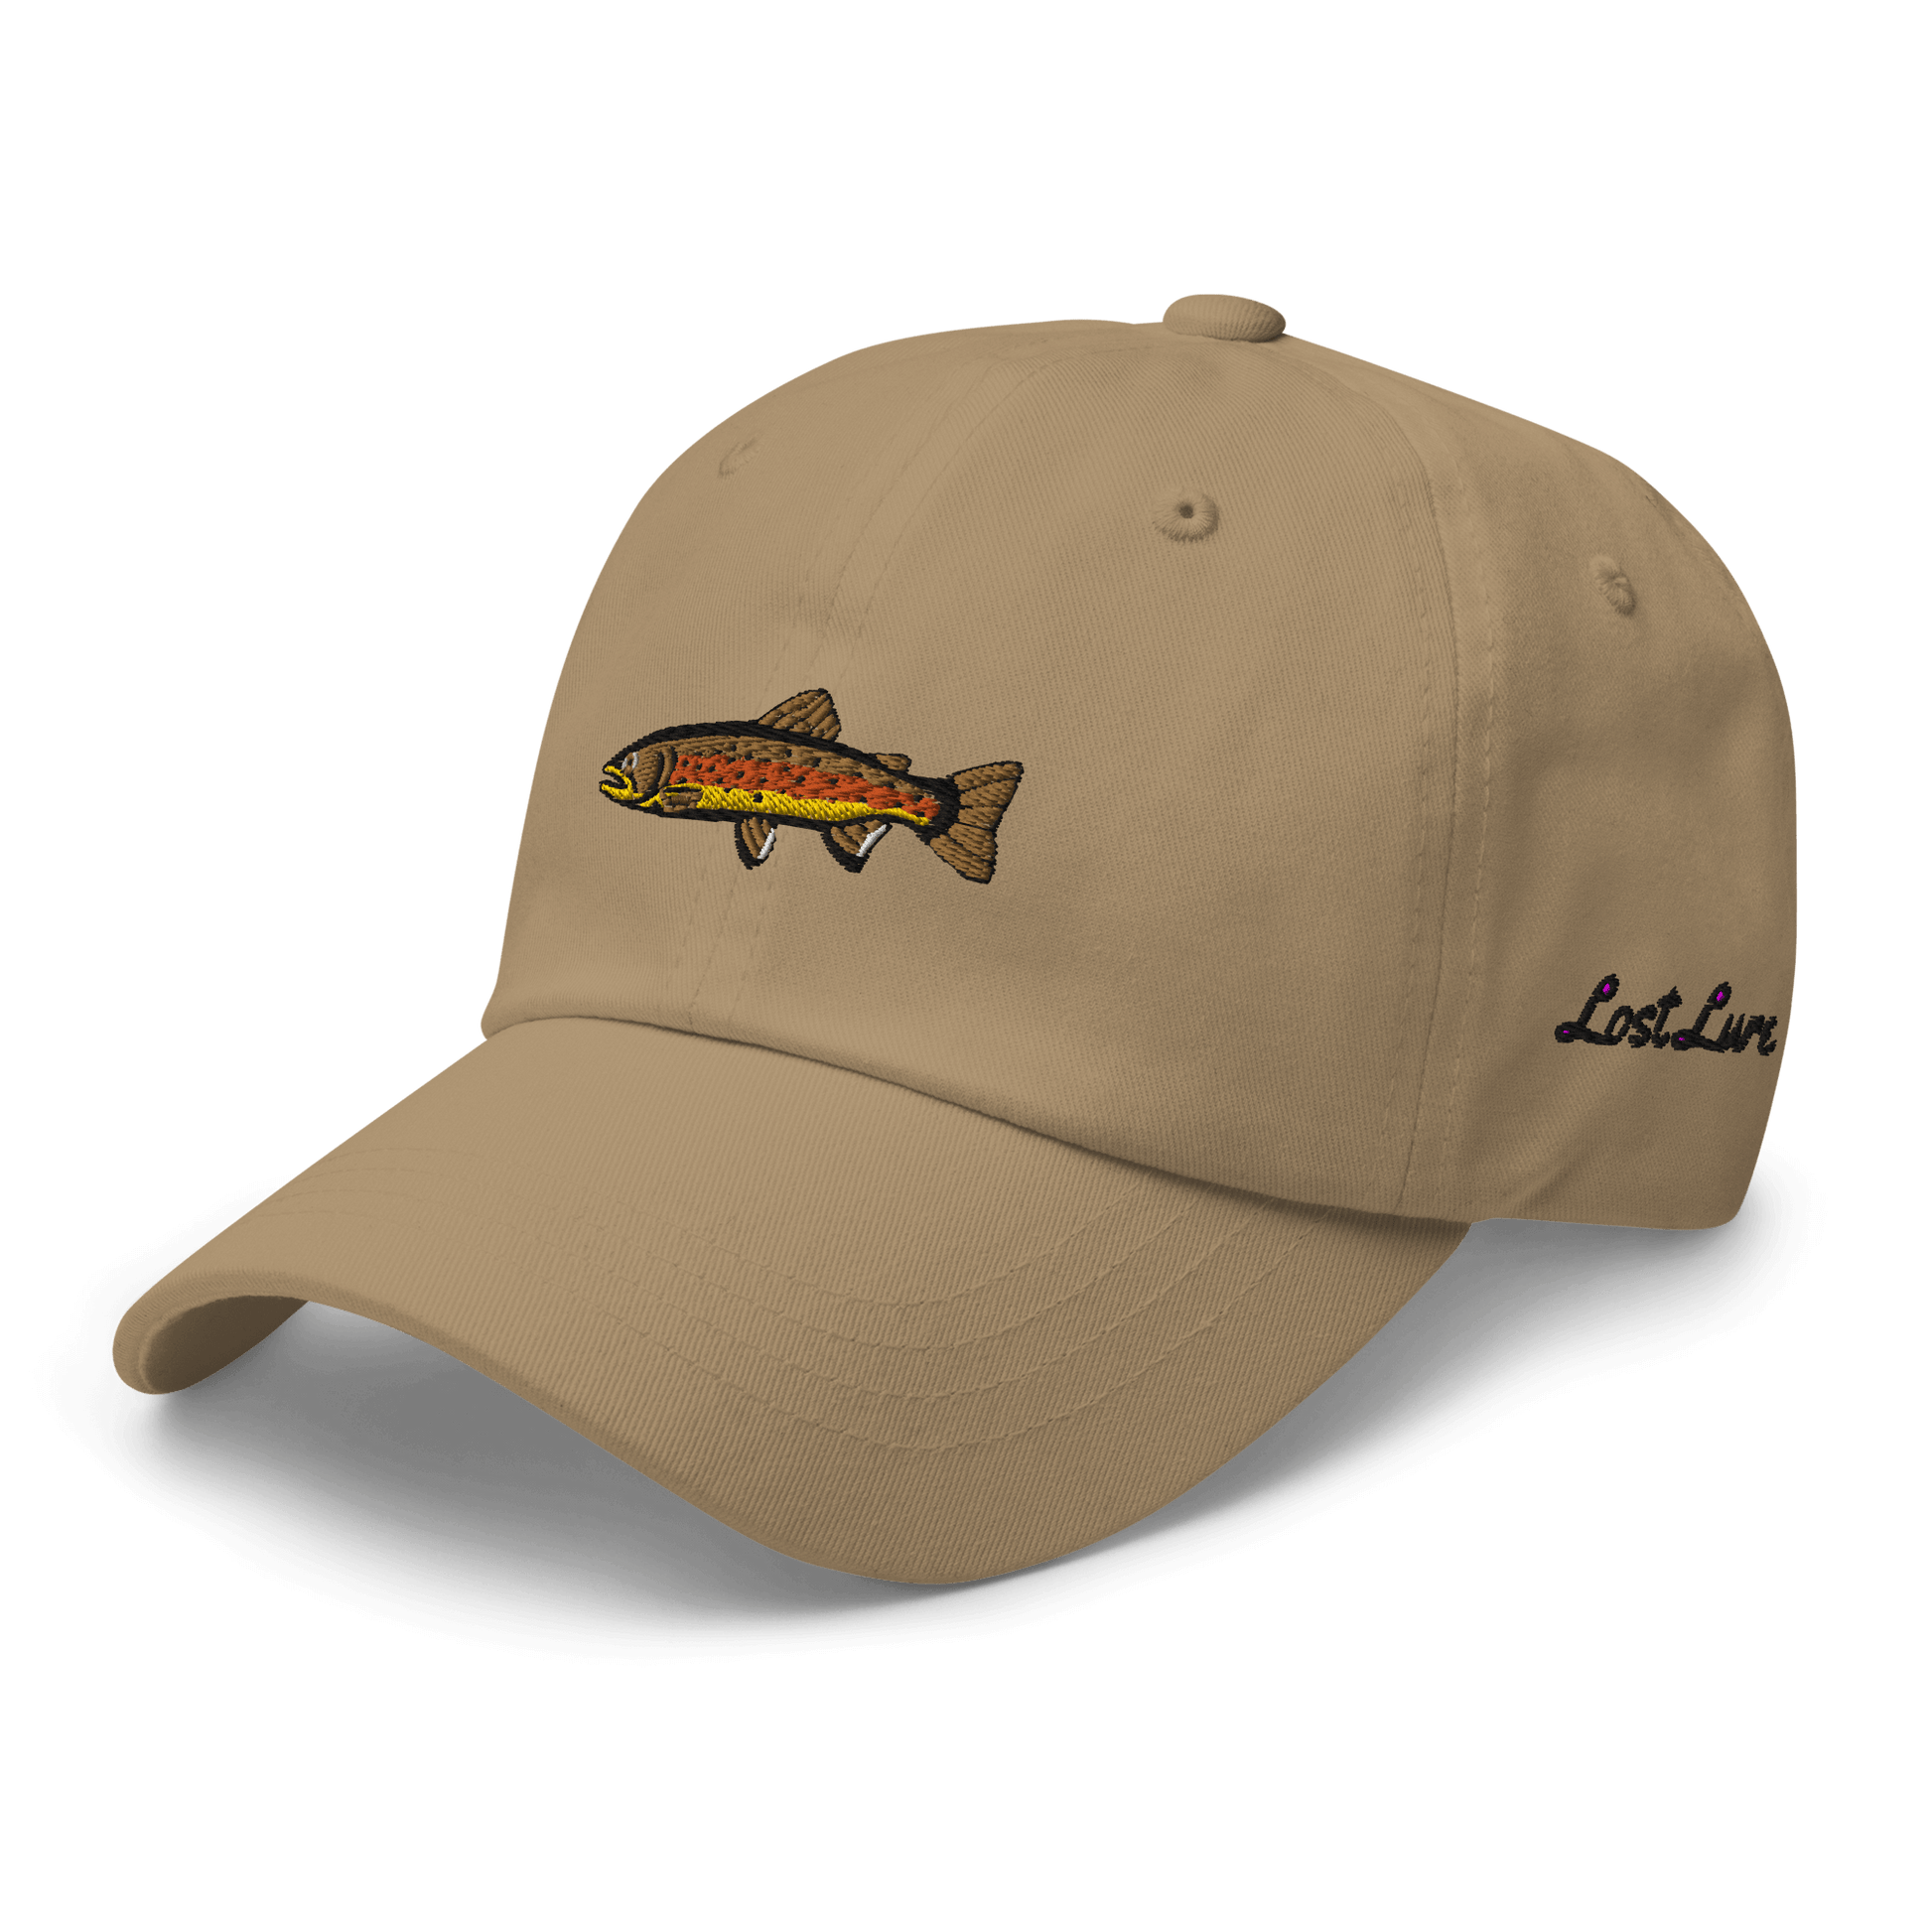 Brown Trout fishing hat. It’s a simple embroidered hat/ dad hat with a brown trout and the lost lure logo on the side. Light brown hat, front left side